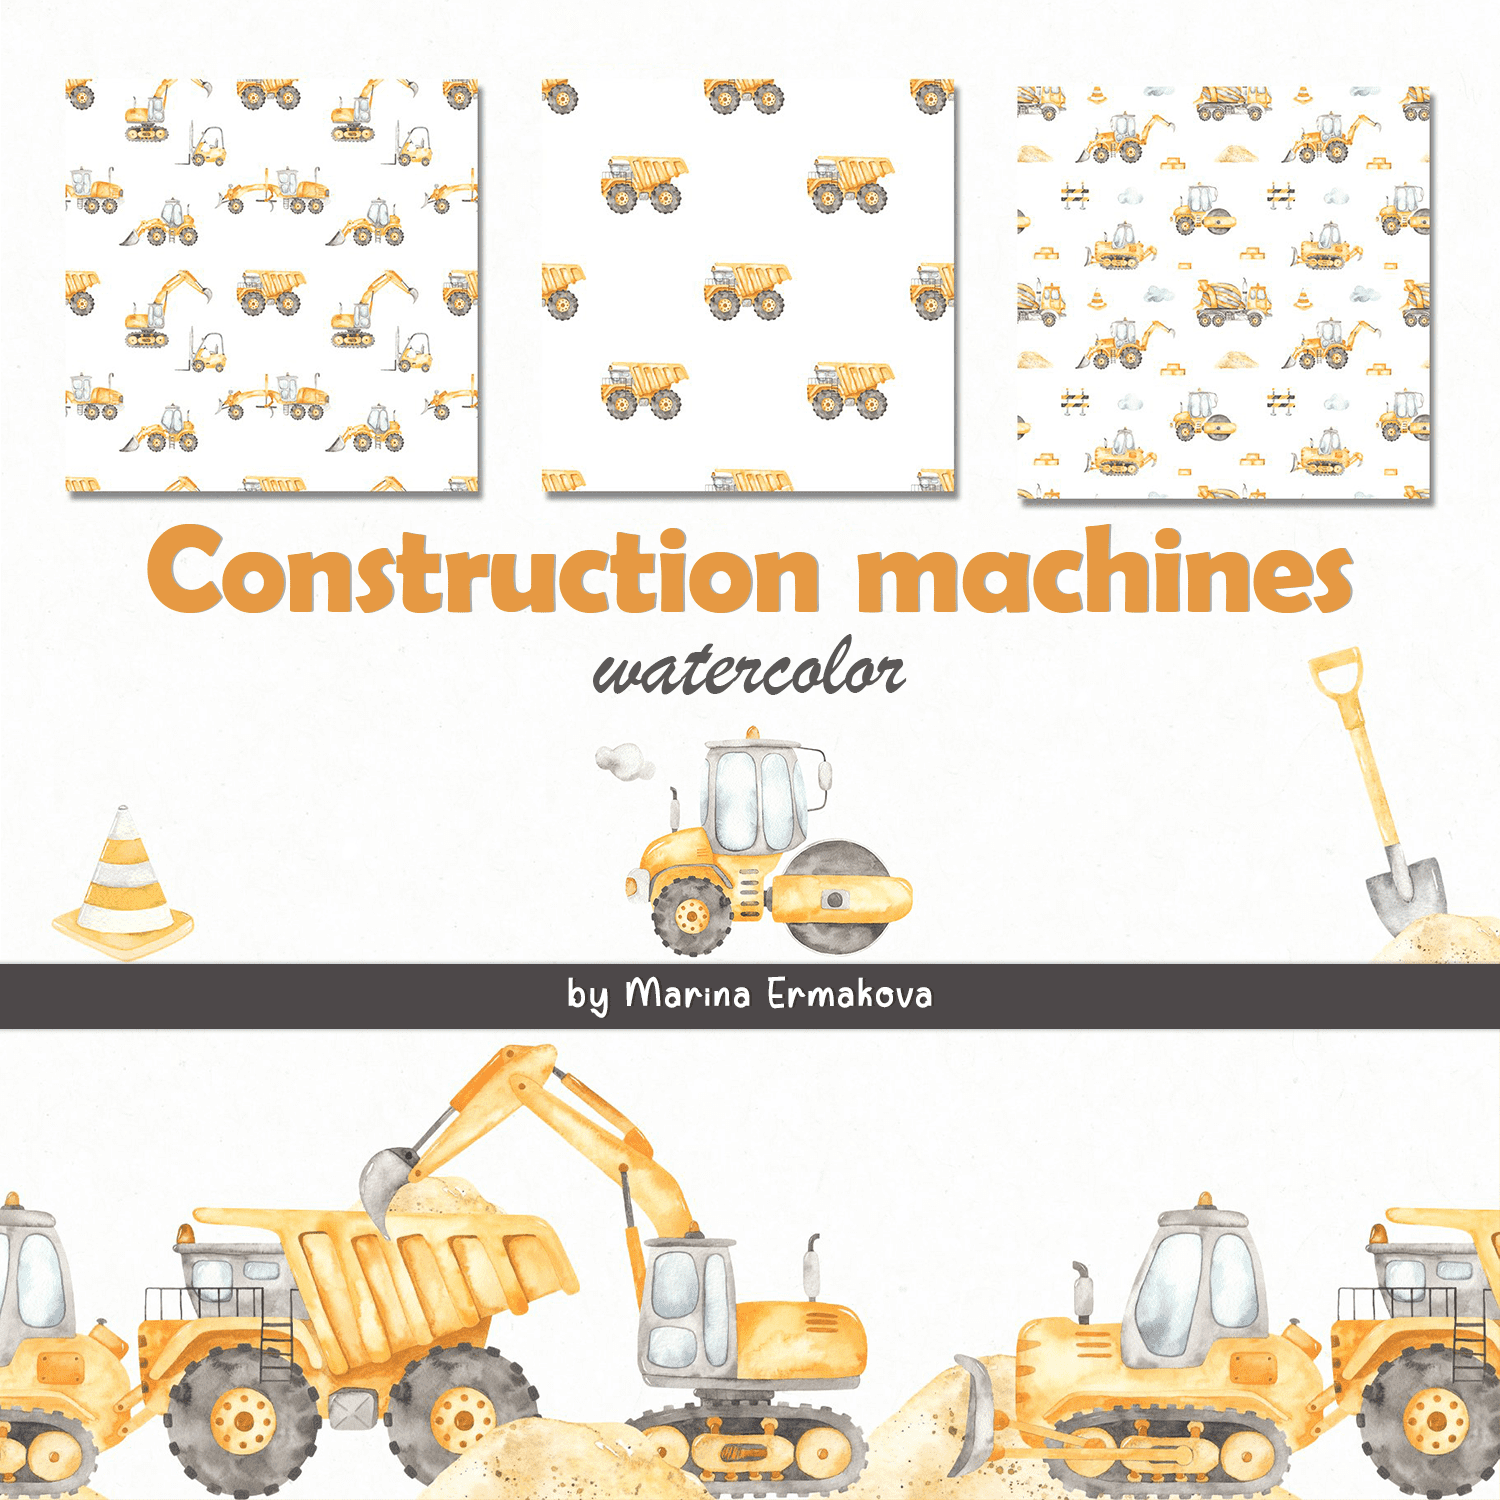 Construction machines watercolor cover.